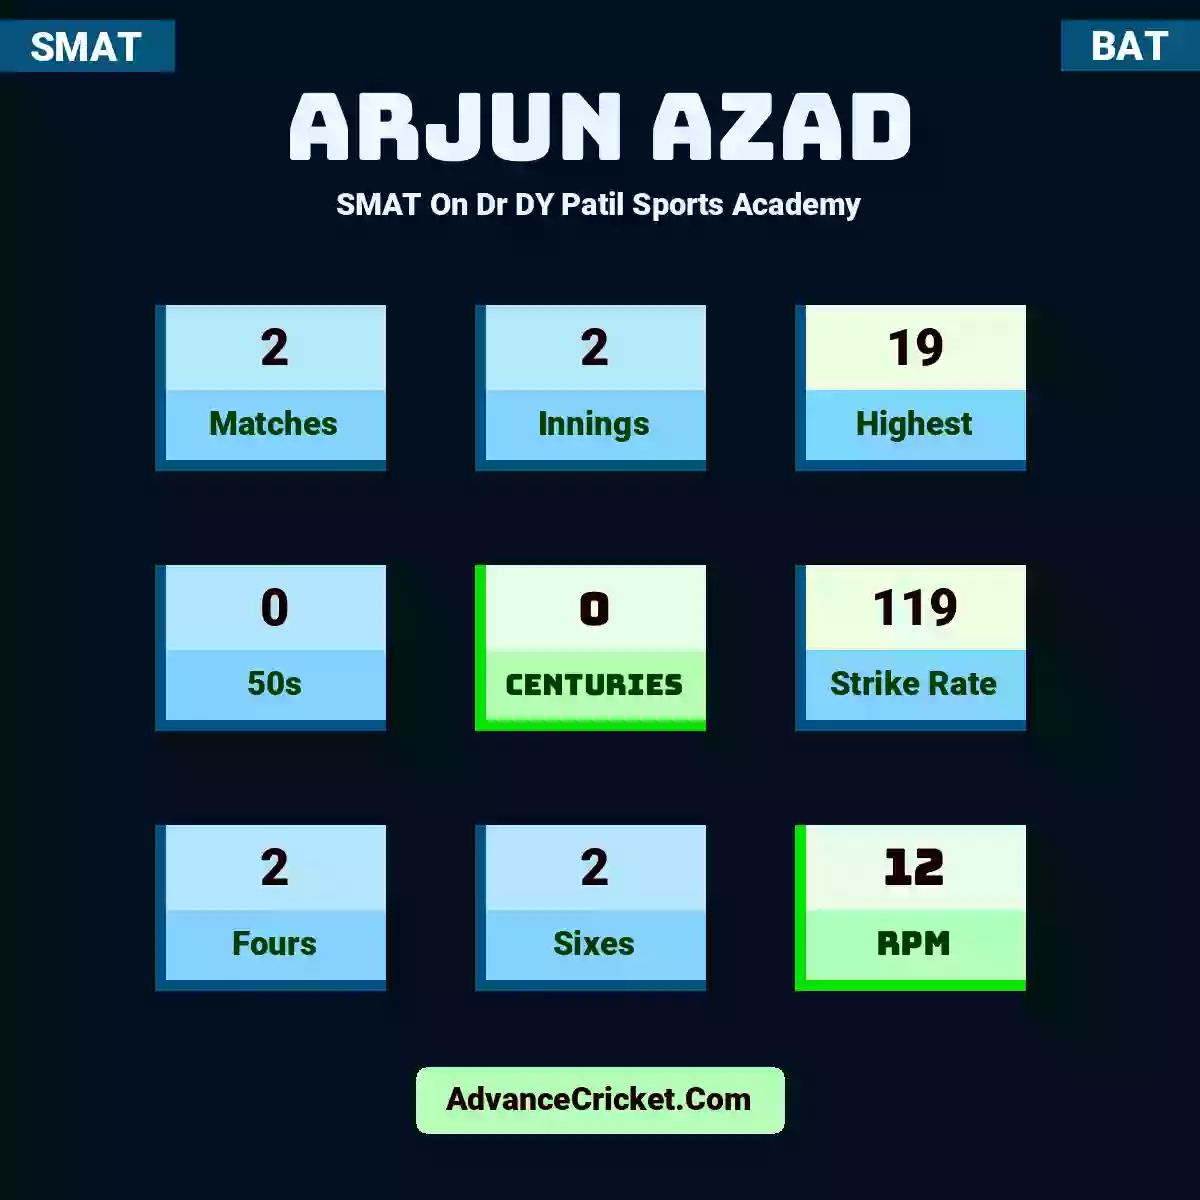 Arjun Azad SMAT  On Dr DY Patil Sports Academy, Arjun Azad played 2 matches, scored 19 runs as highest, 0 half-centuries, and 0 centuries, with a strike rate of 119. A.Azad hit 2 fours and 2 sixes, with an RPM of 12.